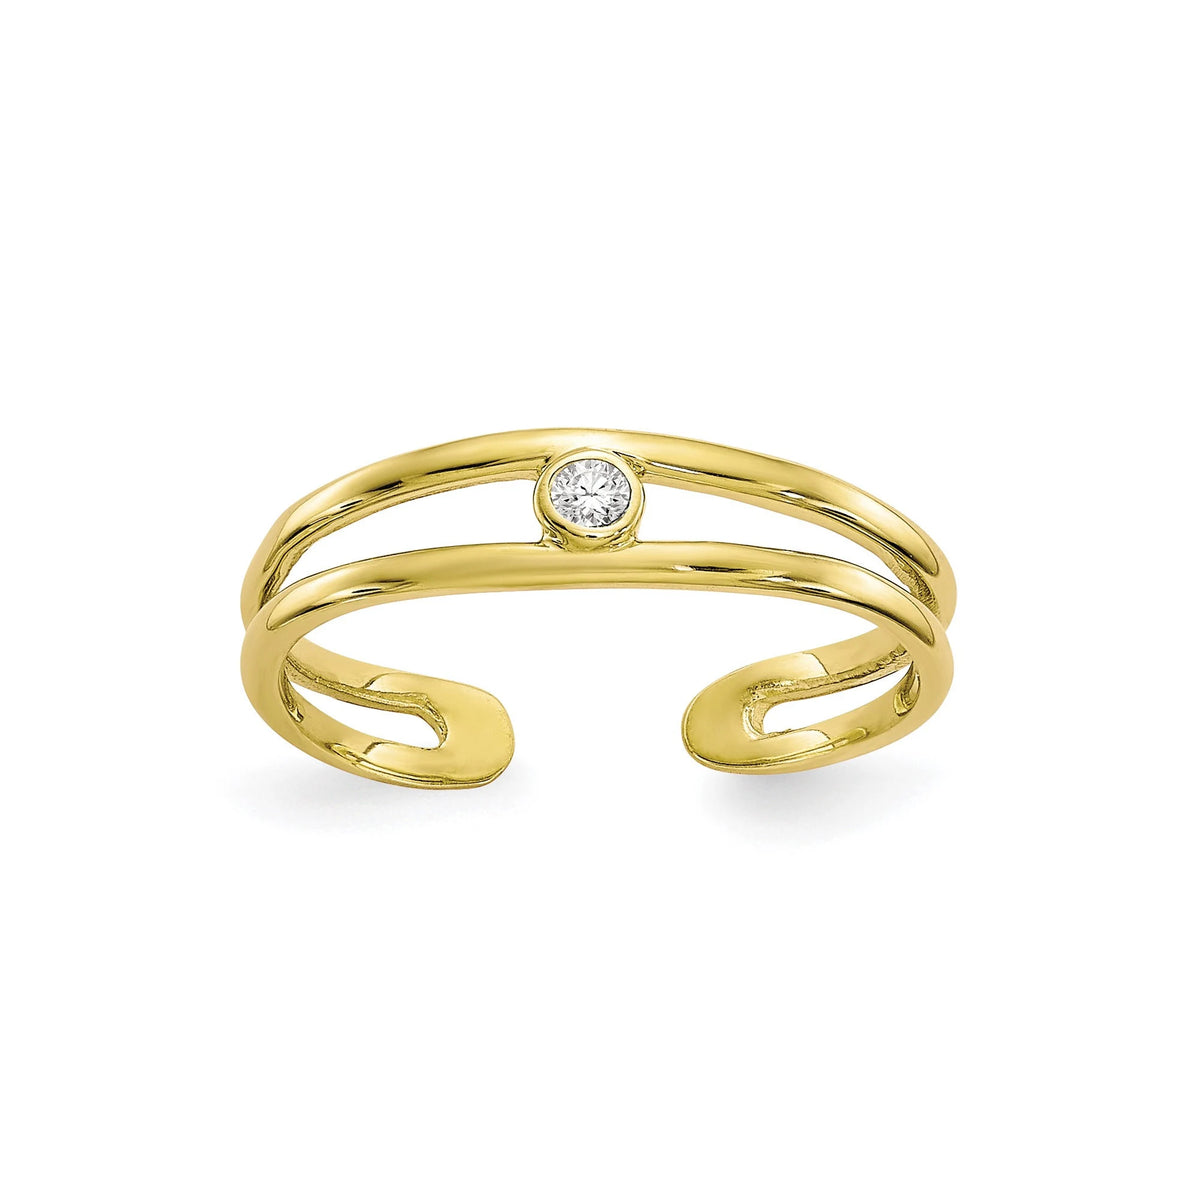 10k Yellow Gold & CZ Solid Toe Ring - Gift Box Included - Made in USA